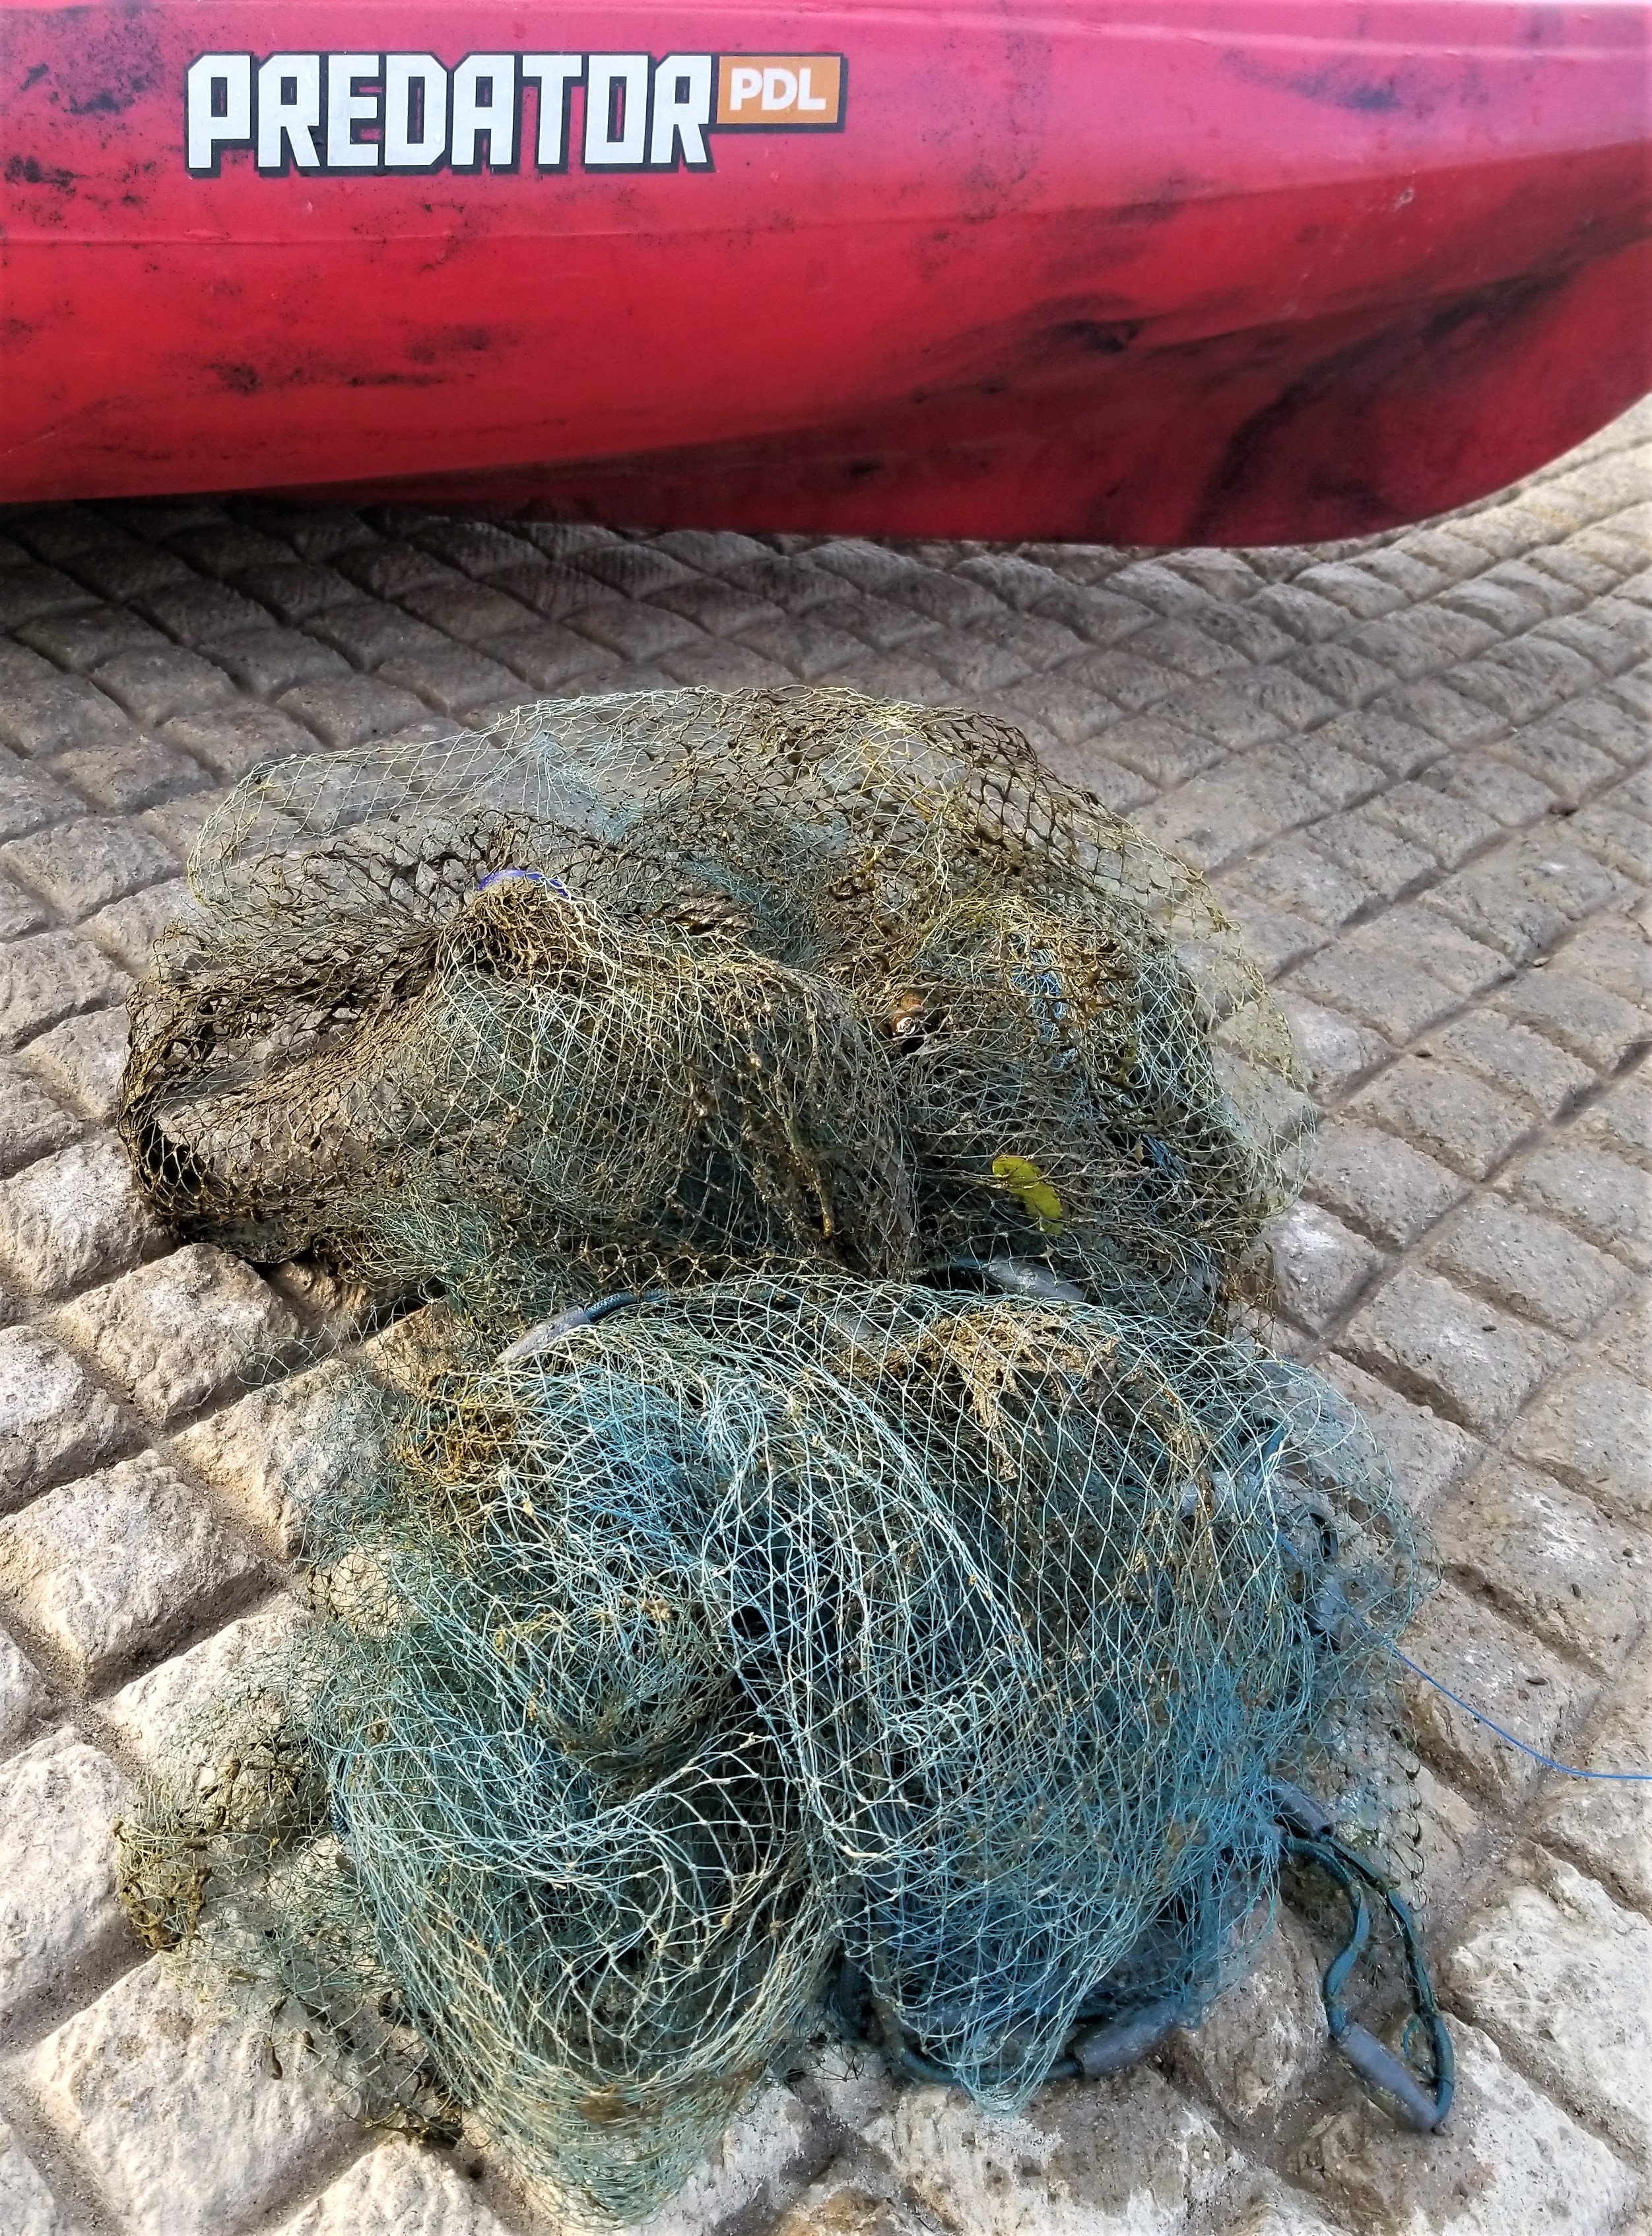 A tangled fishing net Katie pulled out of the lake laying on the boat ramp next to her kayak